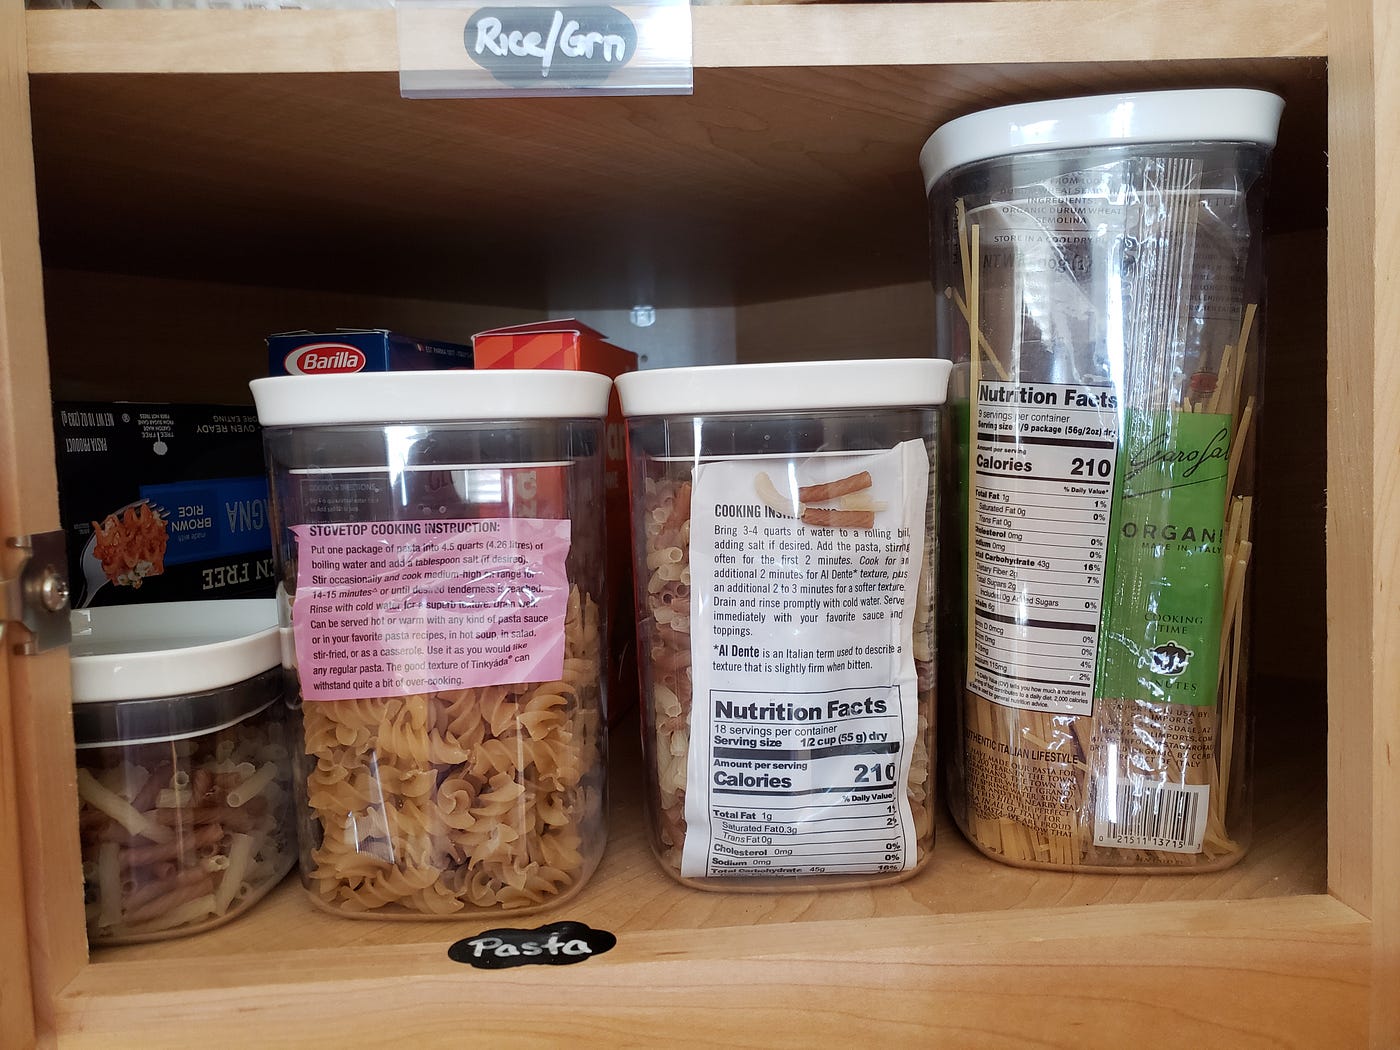 Why I'm storing dry goods in a kitchen pantry with containers and